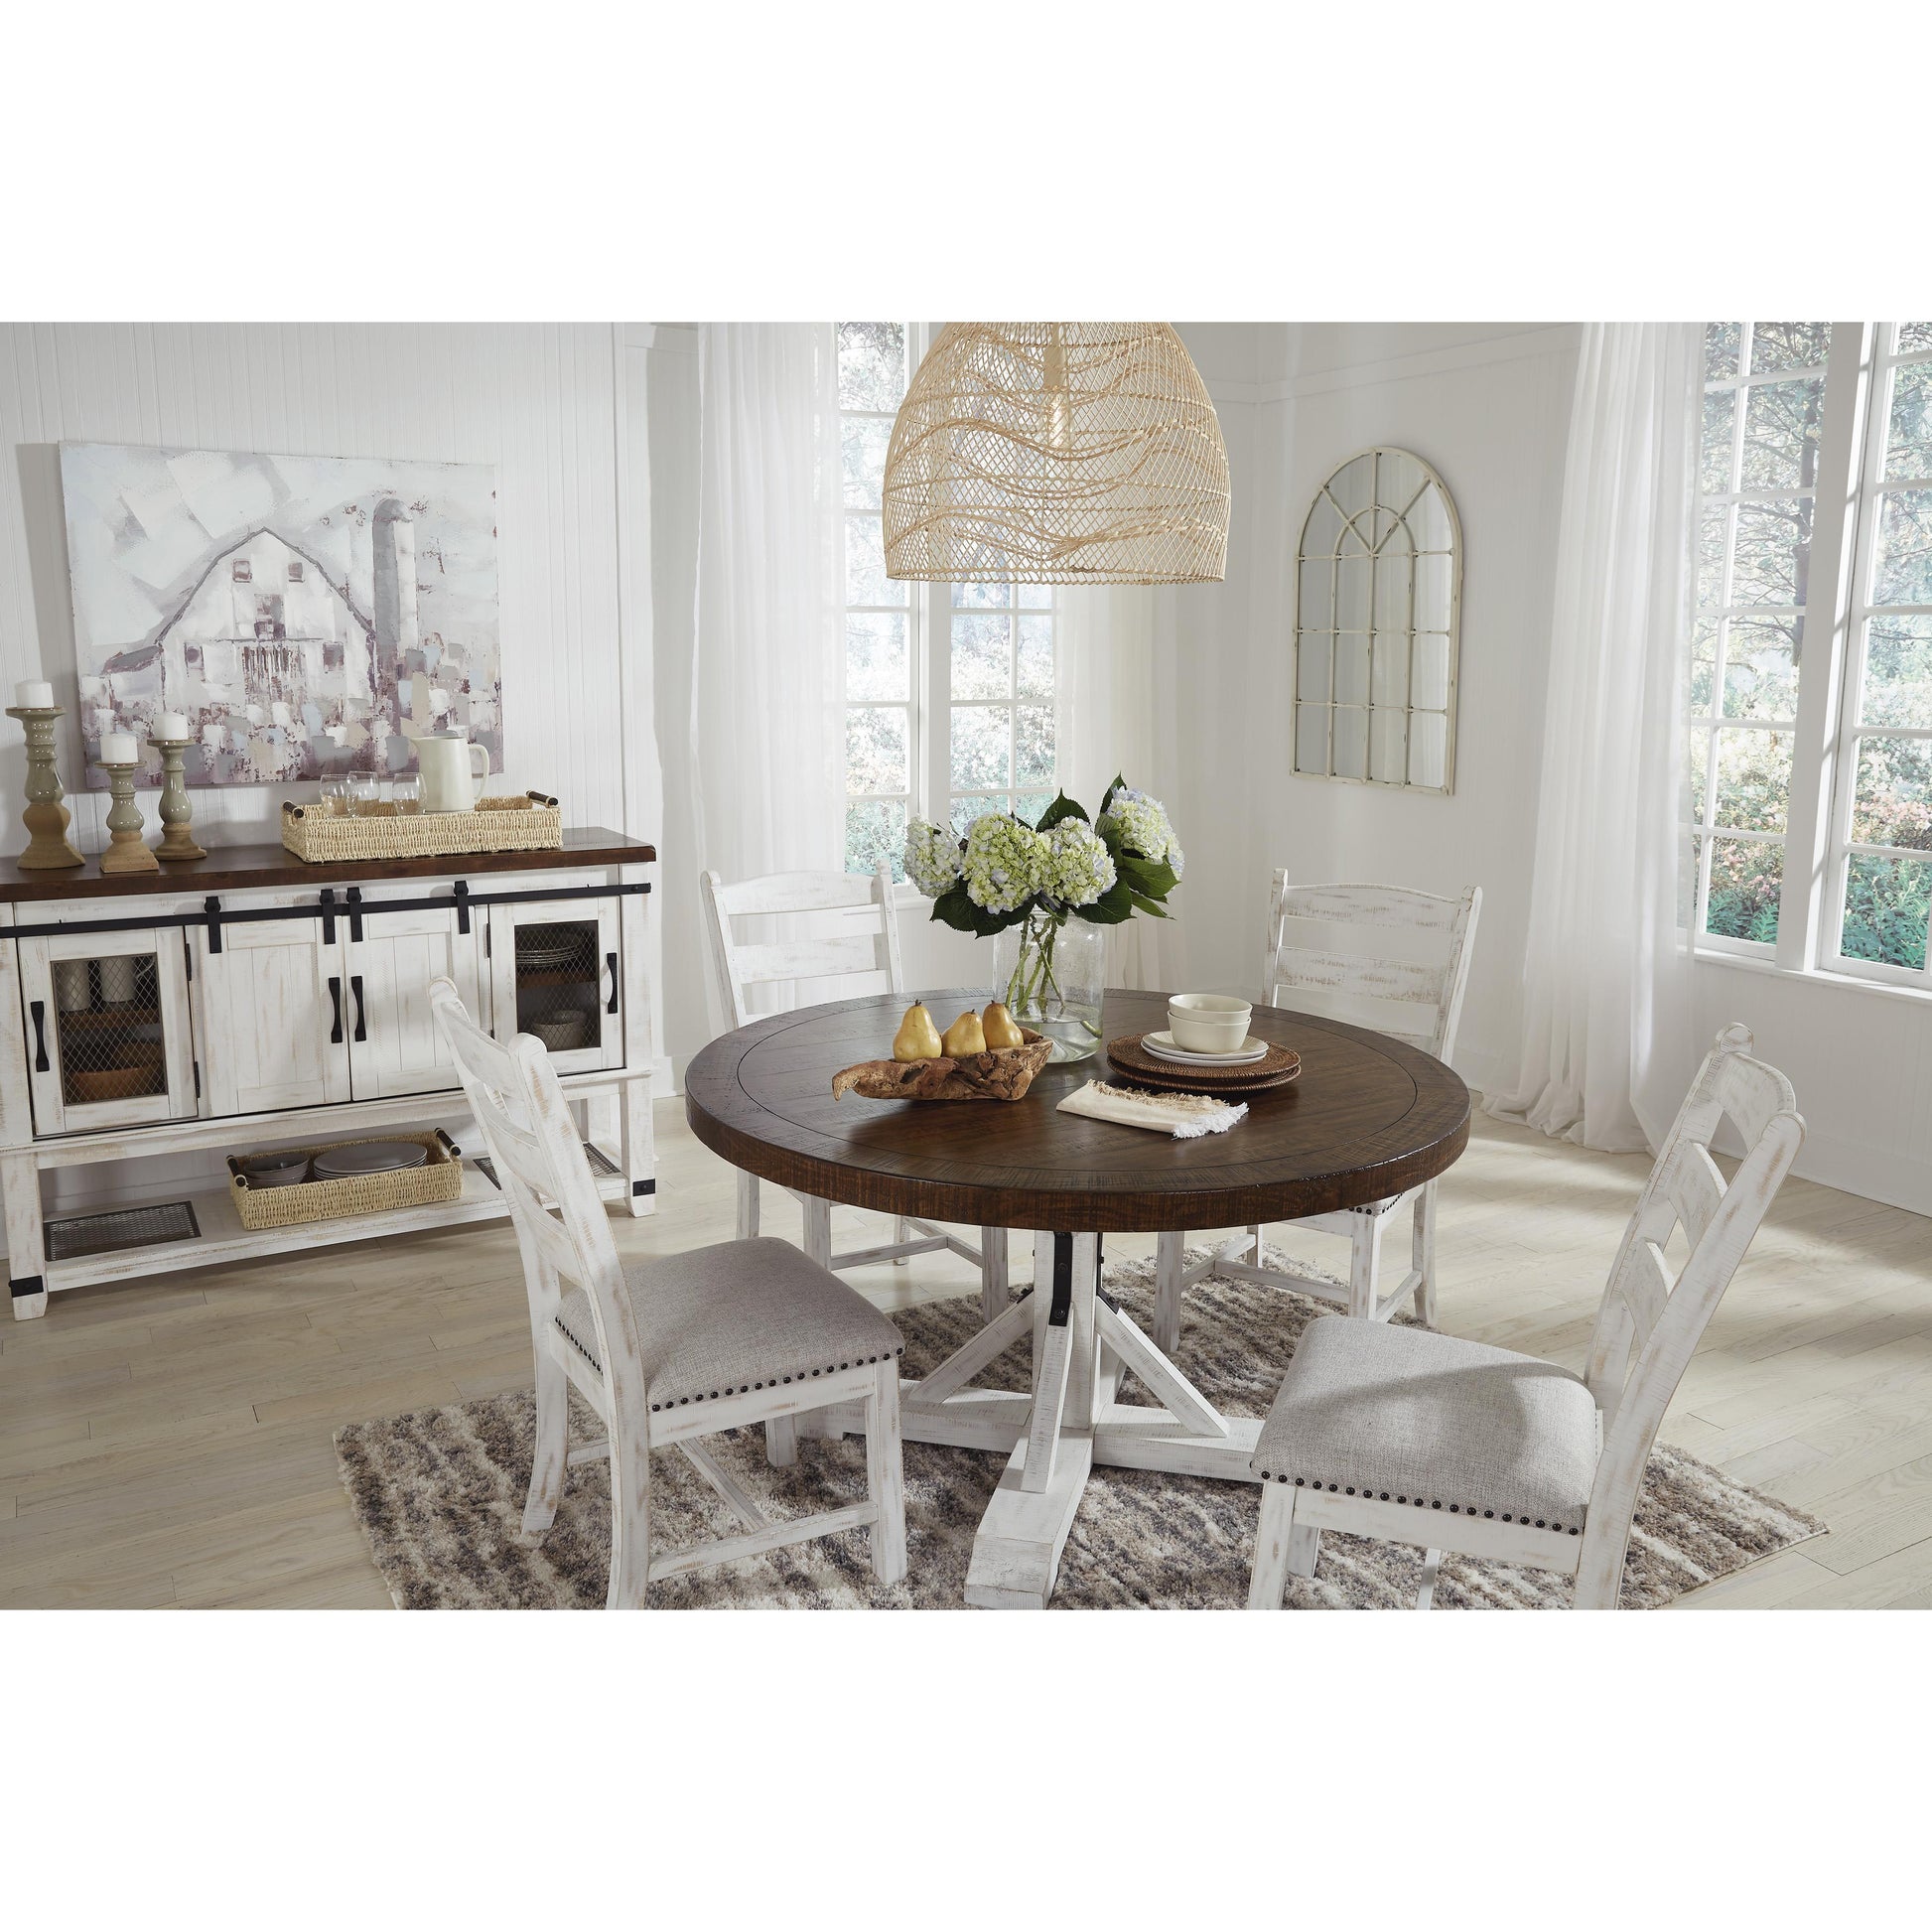 Signature Design by Ashley Round Valebeck Dining Table with Pedestal Base D546-50T/D546-50B